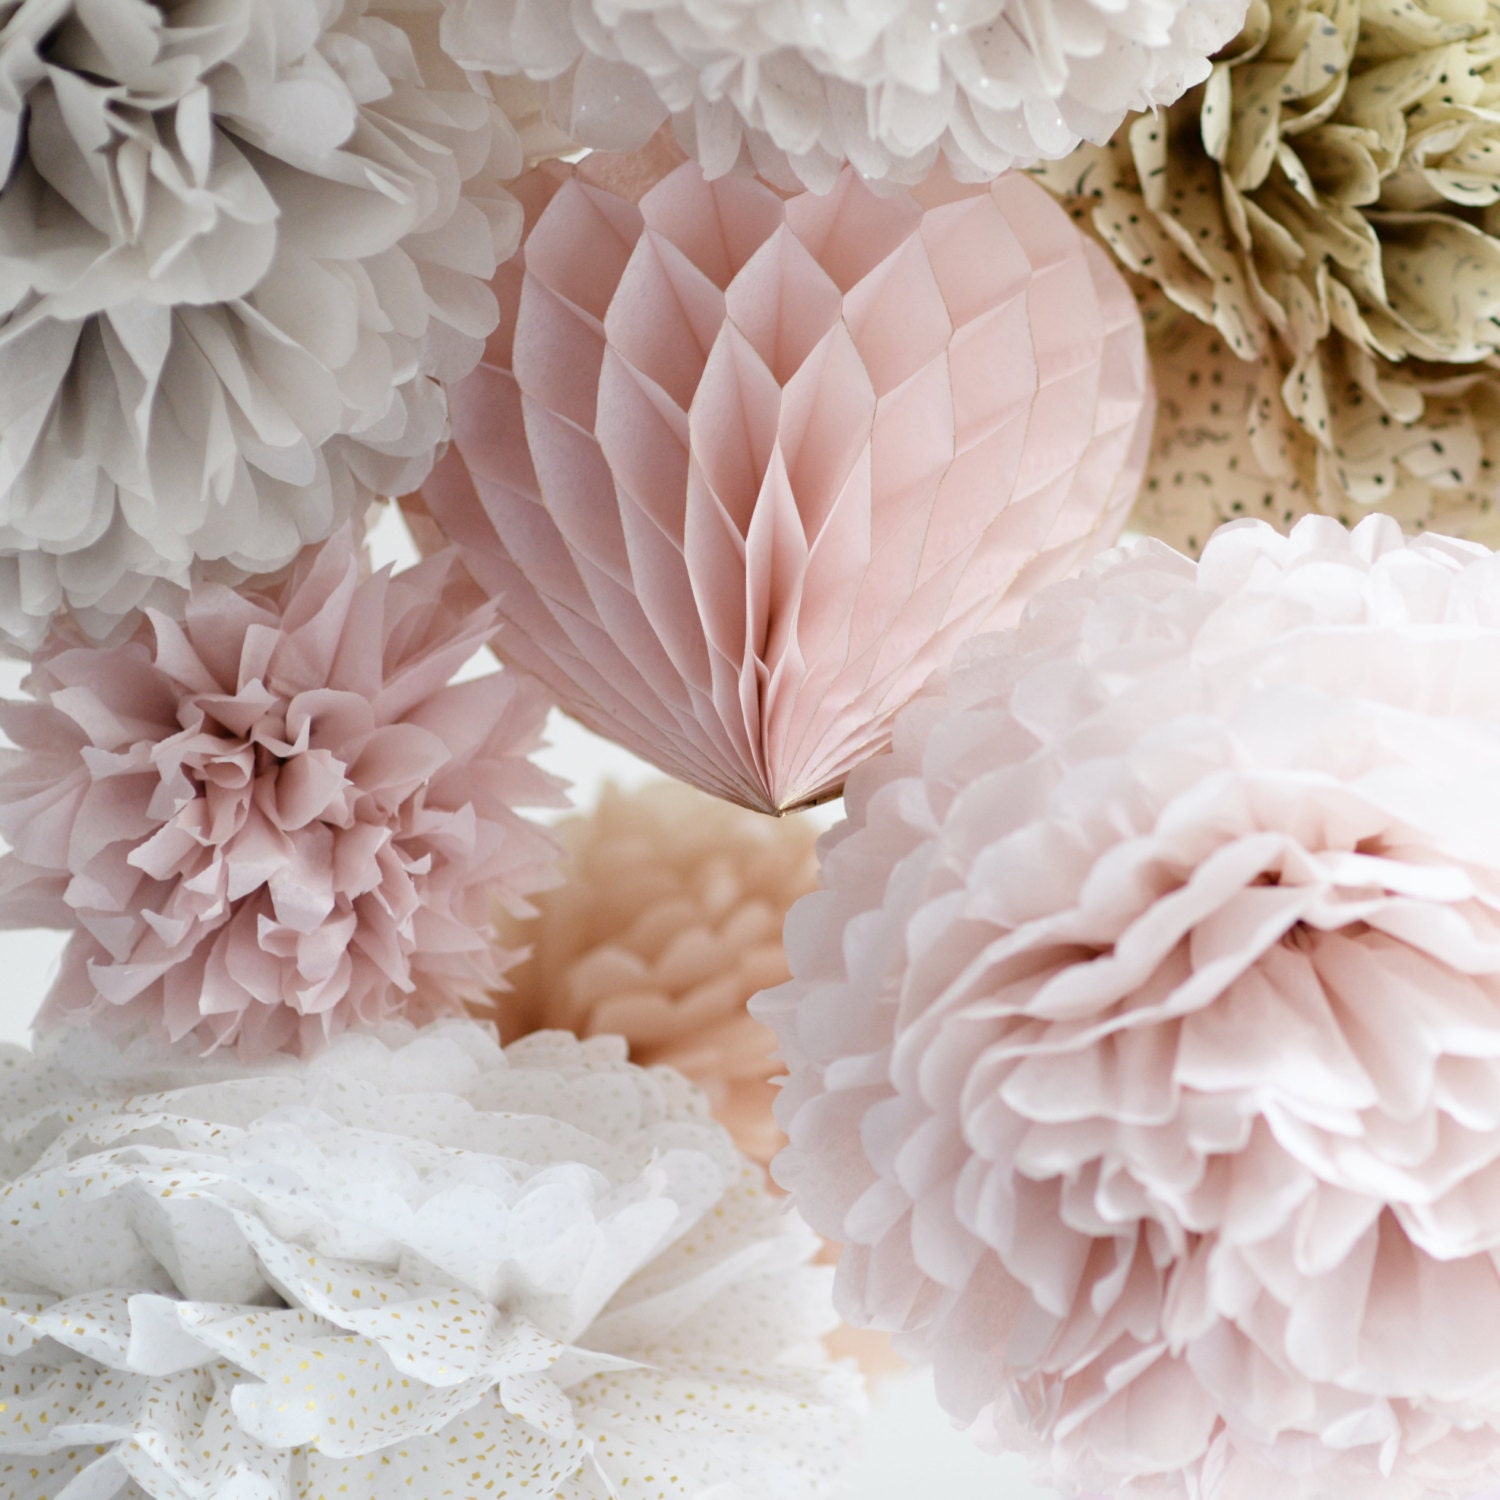 7 Large Tissue Paper Flowers 9 party Decor, Wedding Reception